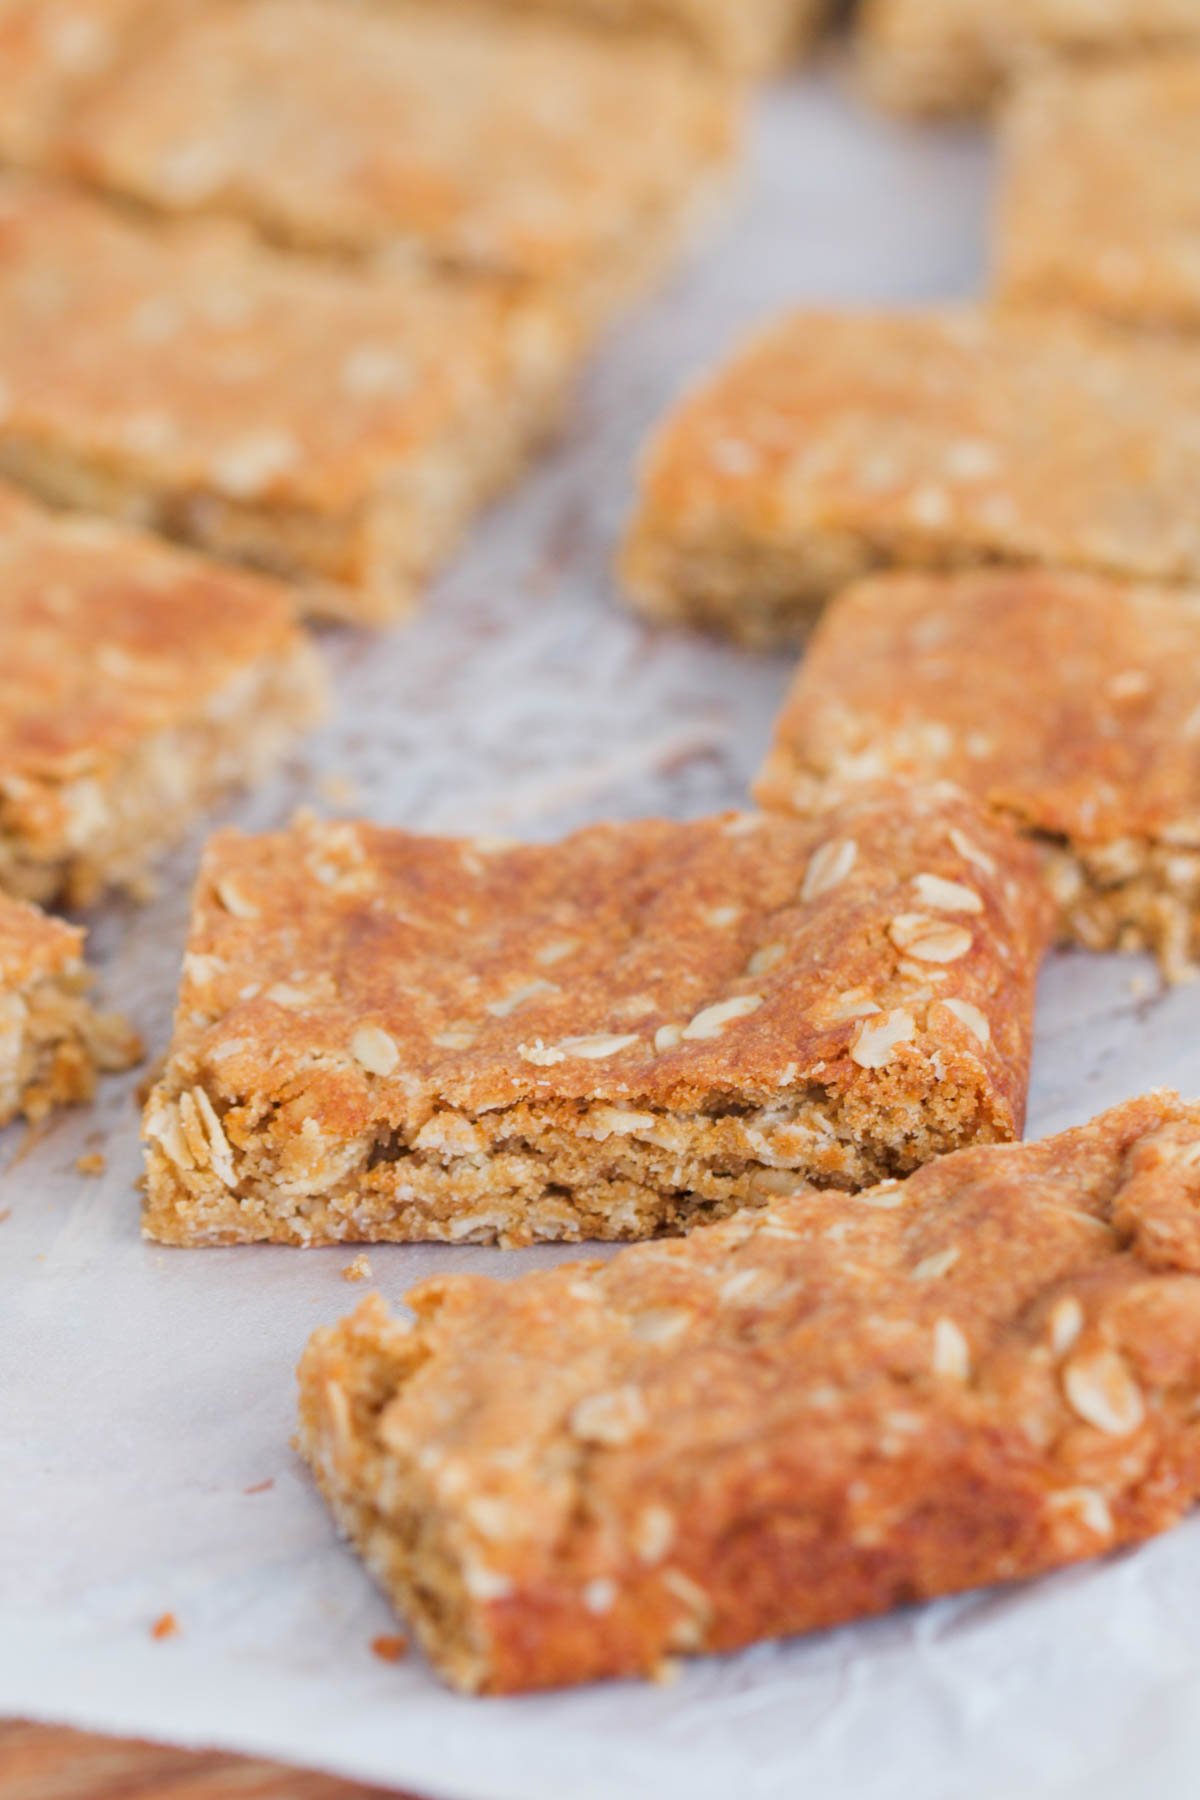 Pieces of sweet slice made with rolled oats on a chopping board with baking paper.